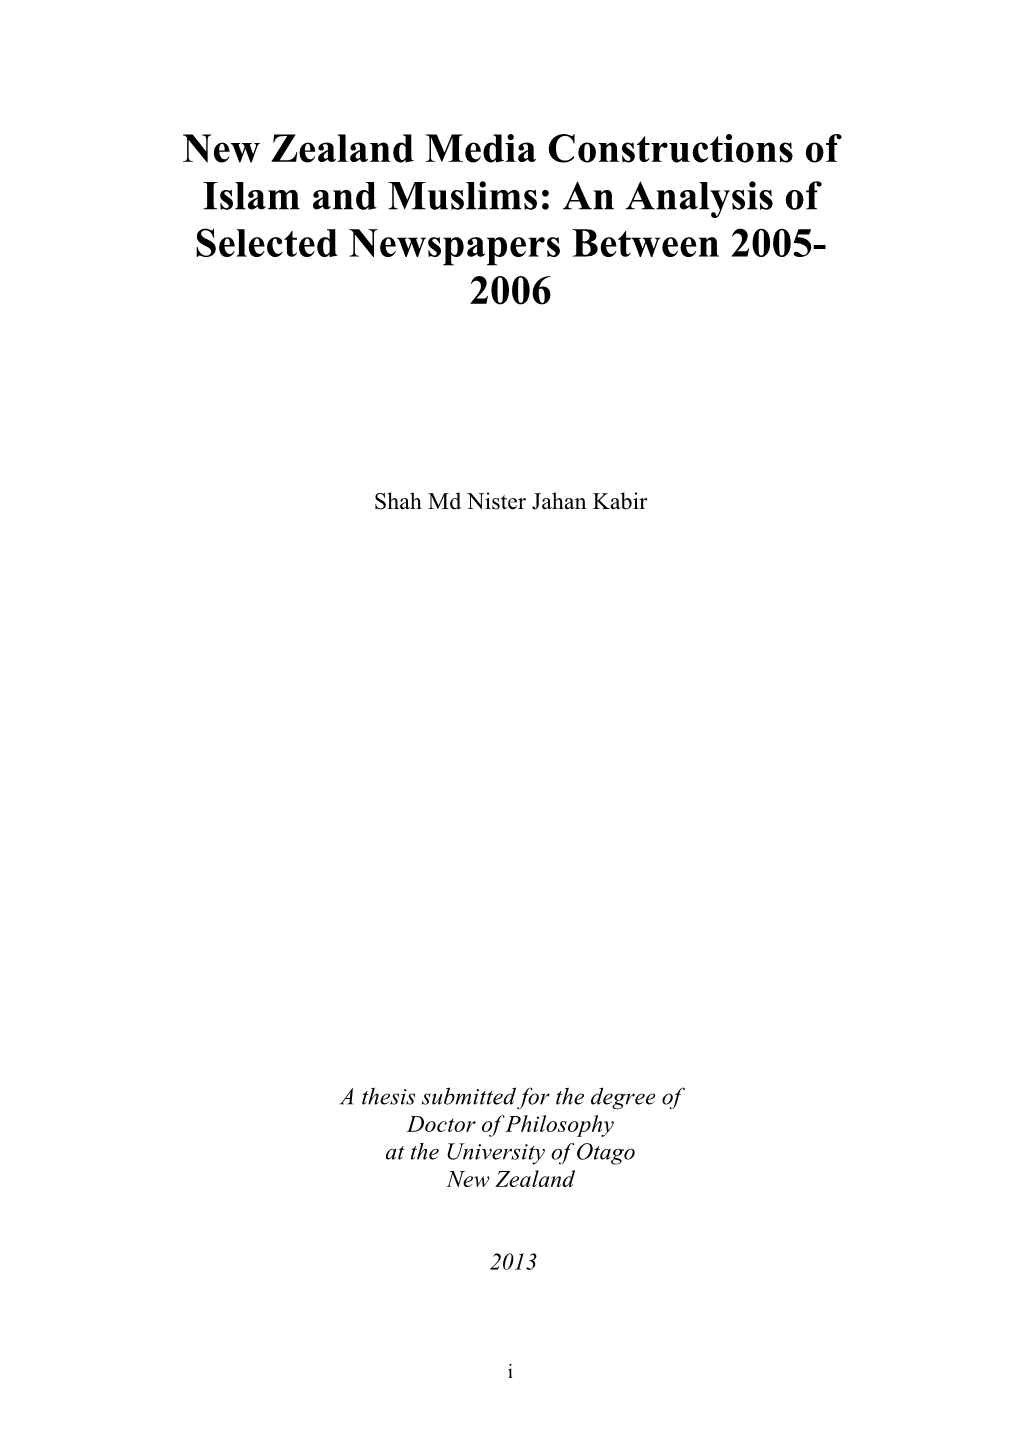 New Zealand Media Constructions of Islam and Muslims: an Analysis of Selected Newspapers Between 2005- 2006